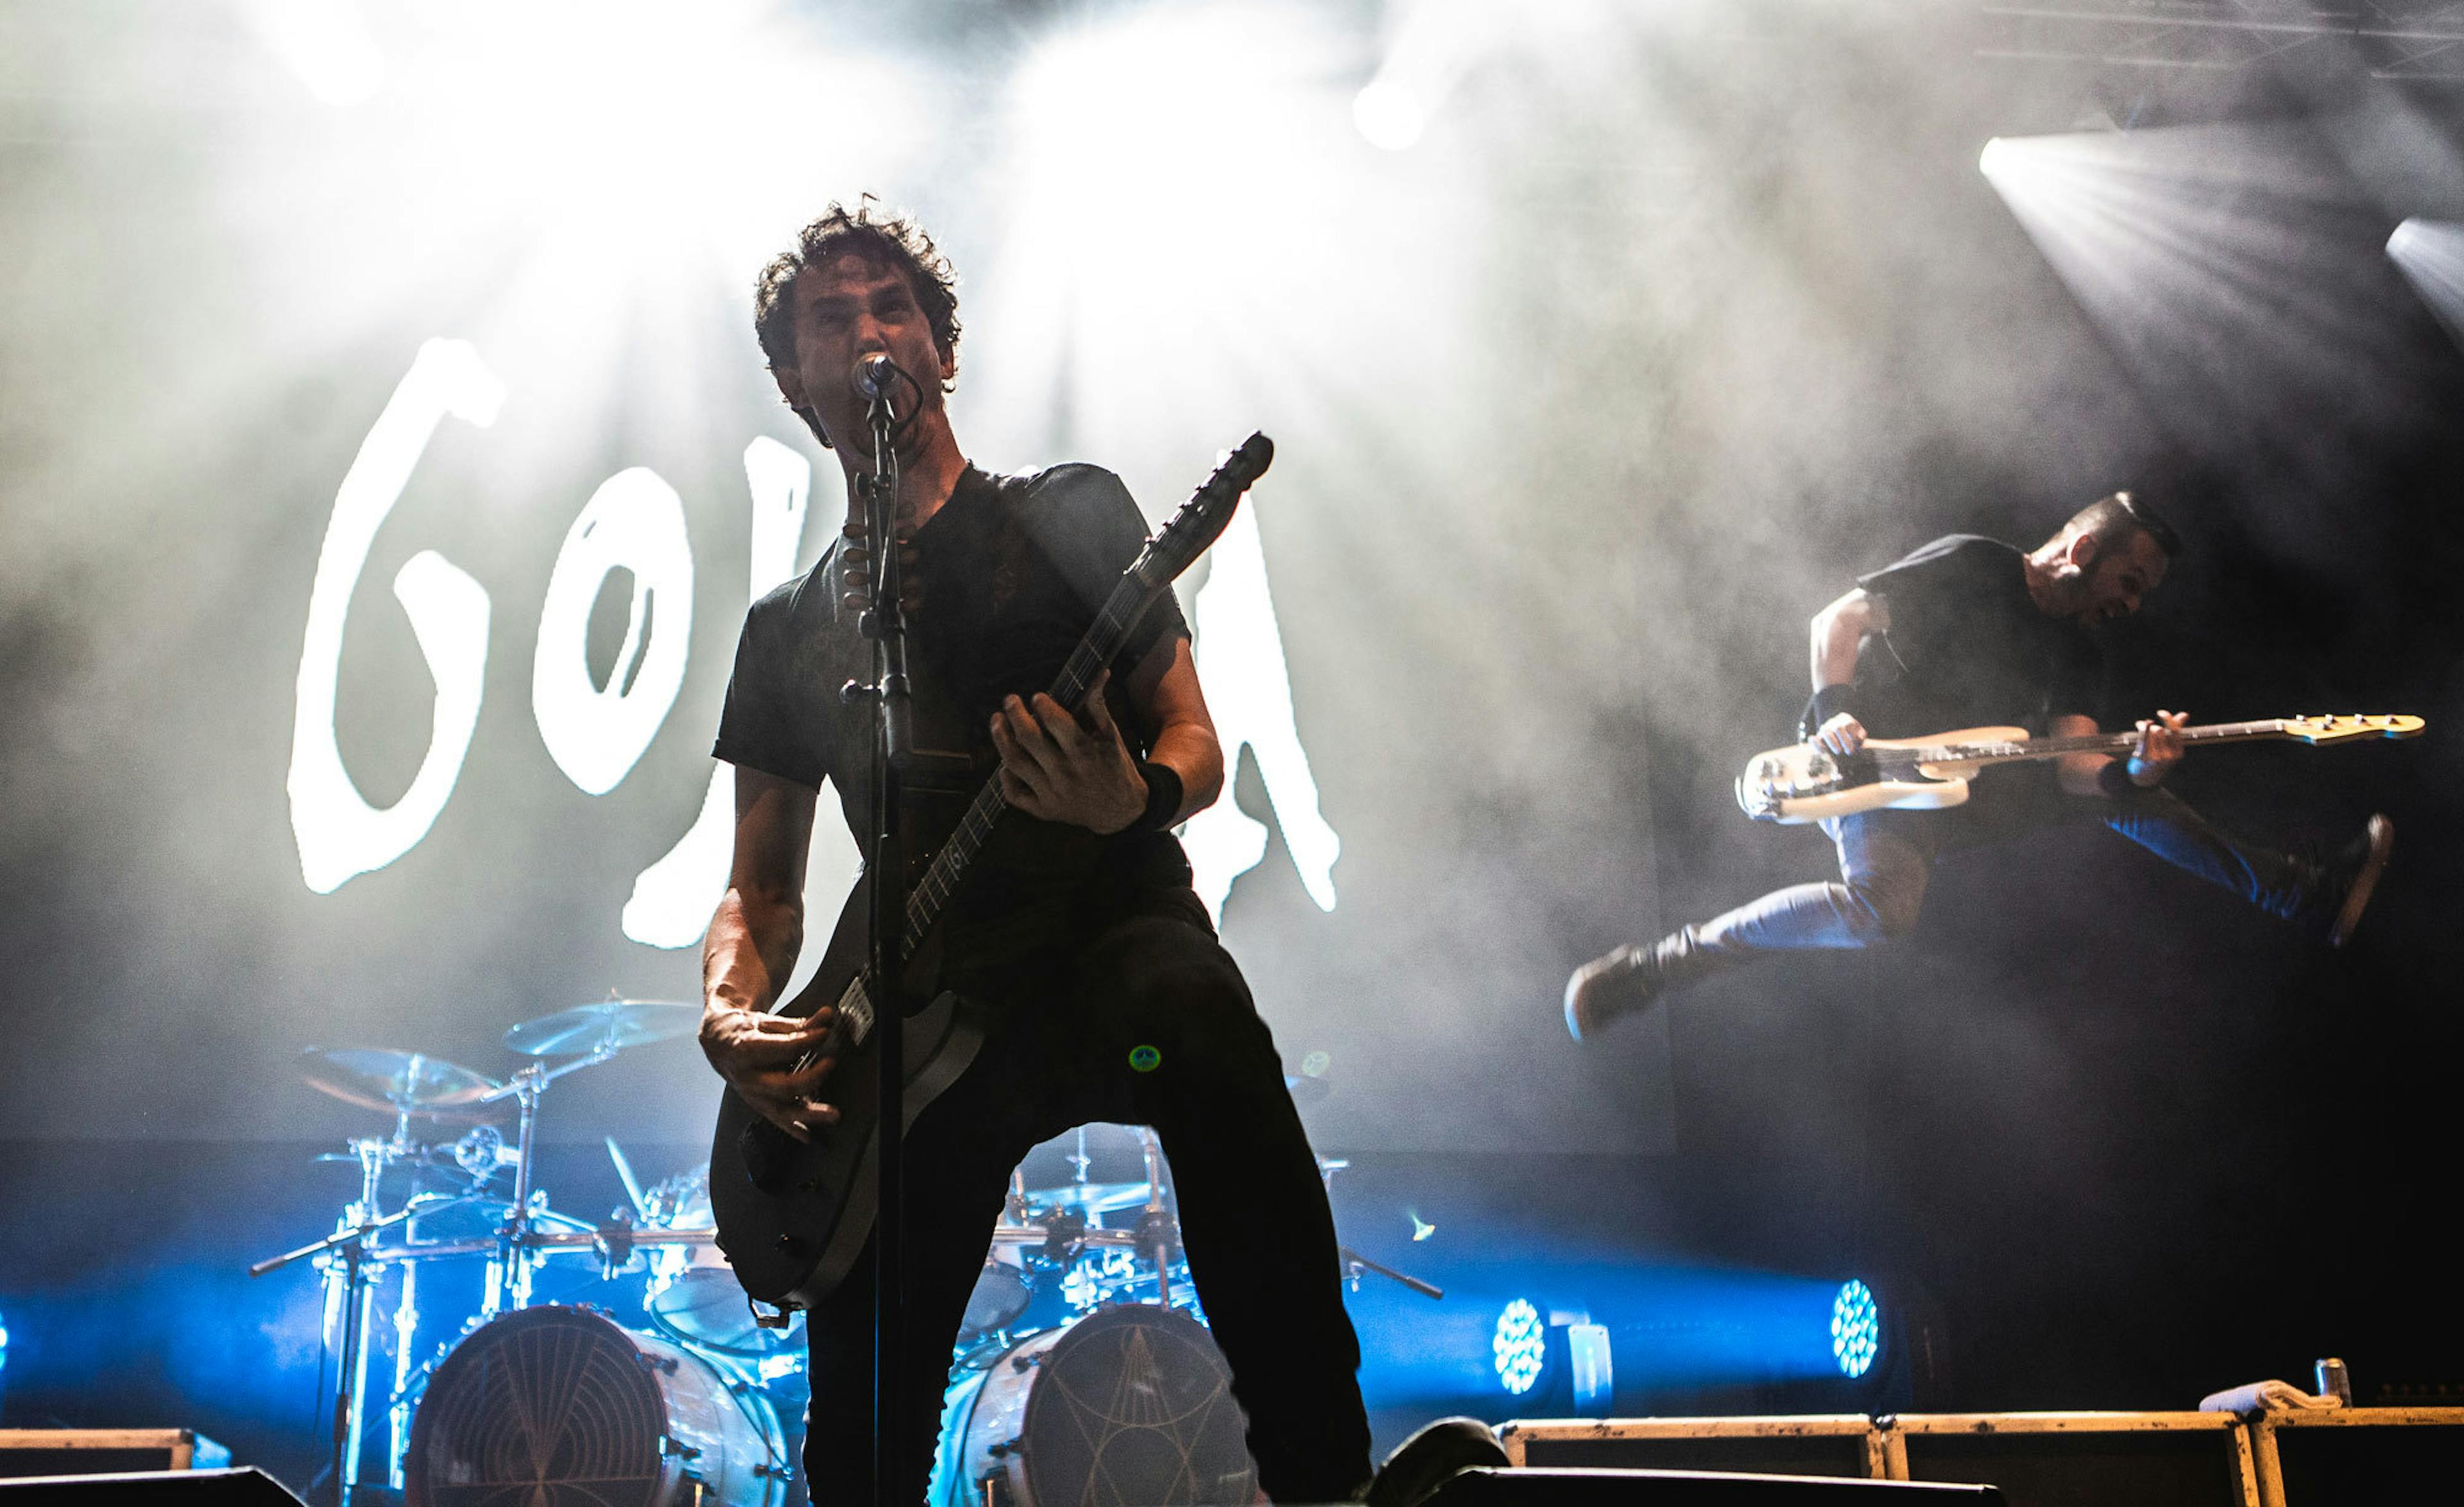 Gojira Are Teasing Something: "Another Place To Be"